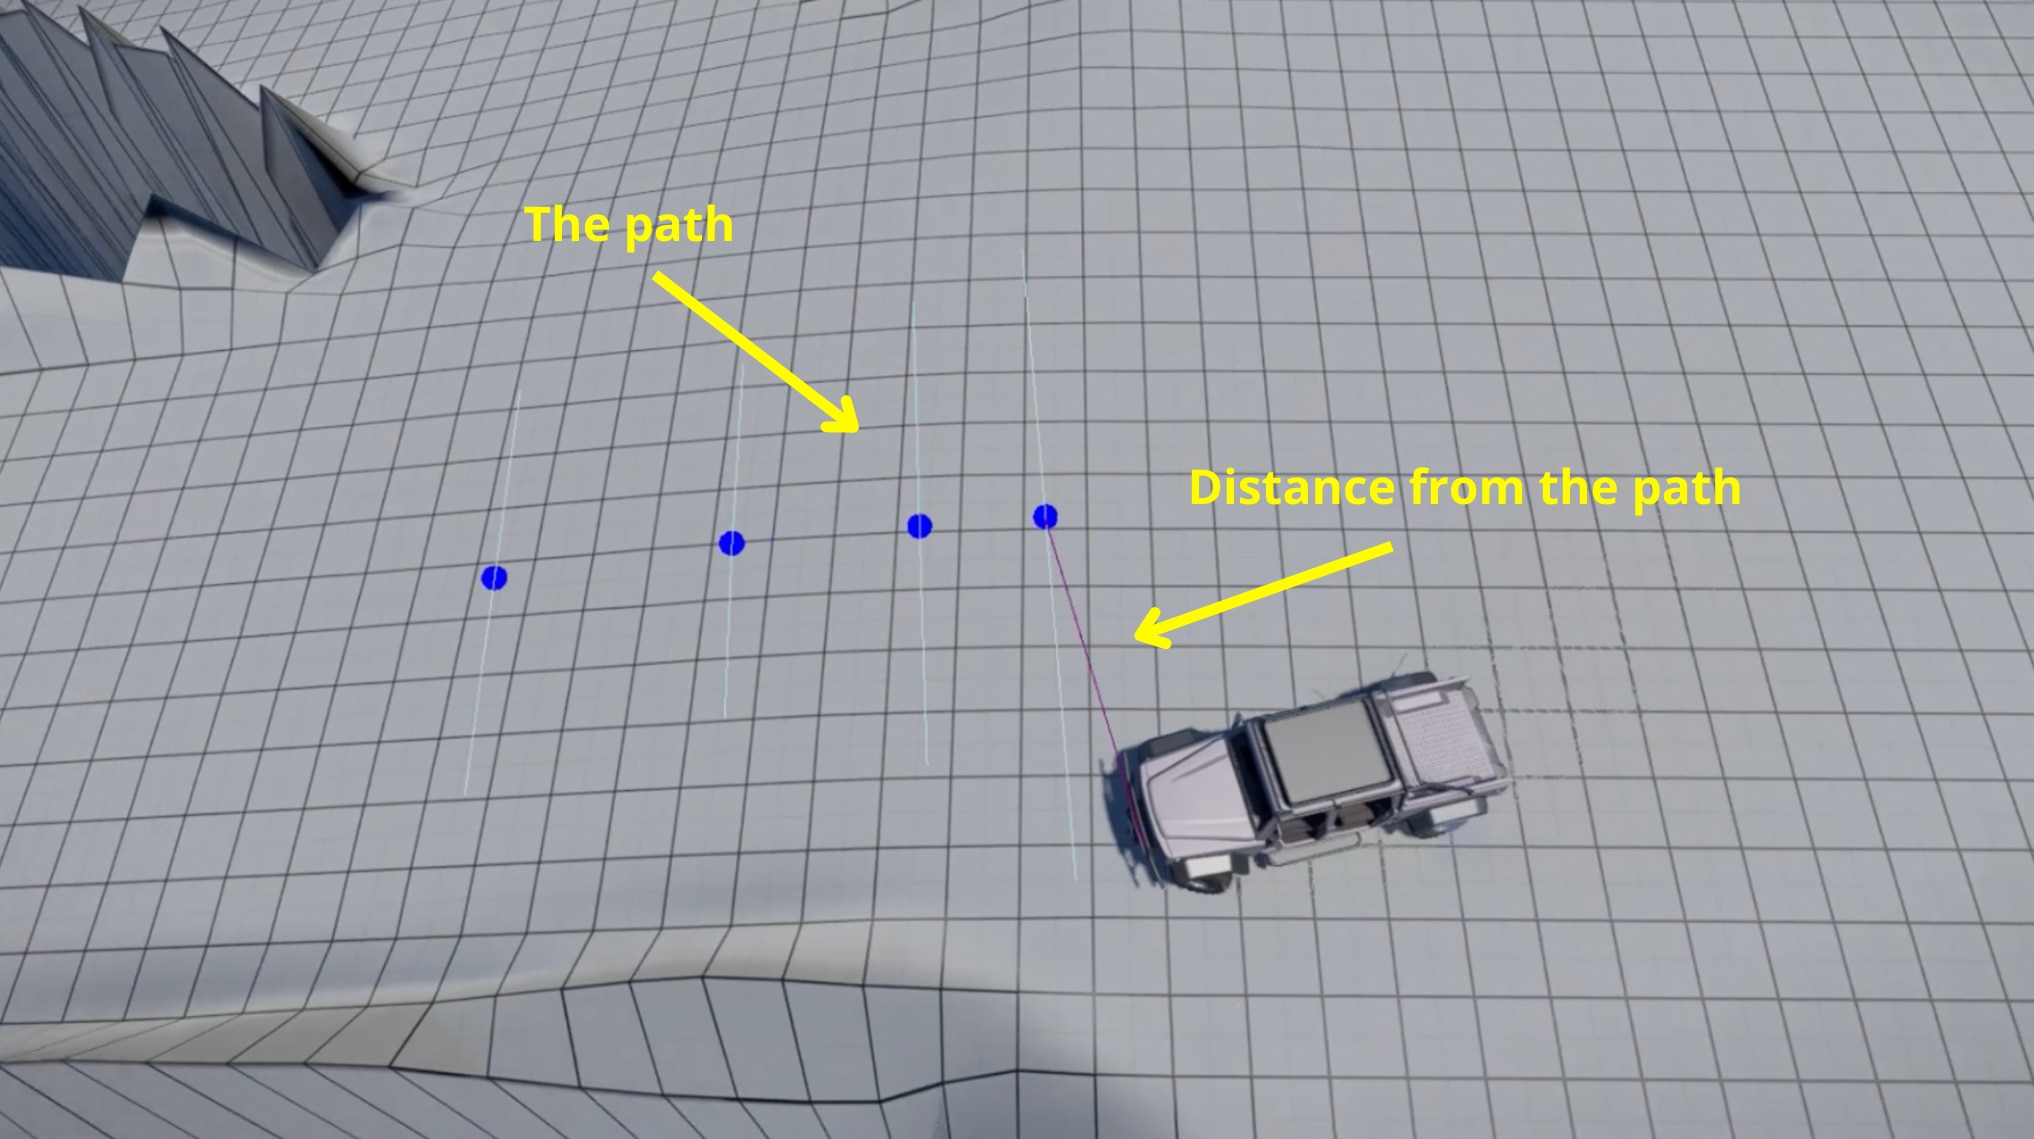 [La Forge] Constrained Reinforcement Learning and self driving cars – An intern’s journey - vehiclepath5